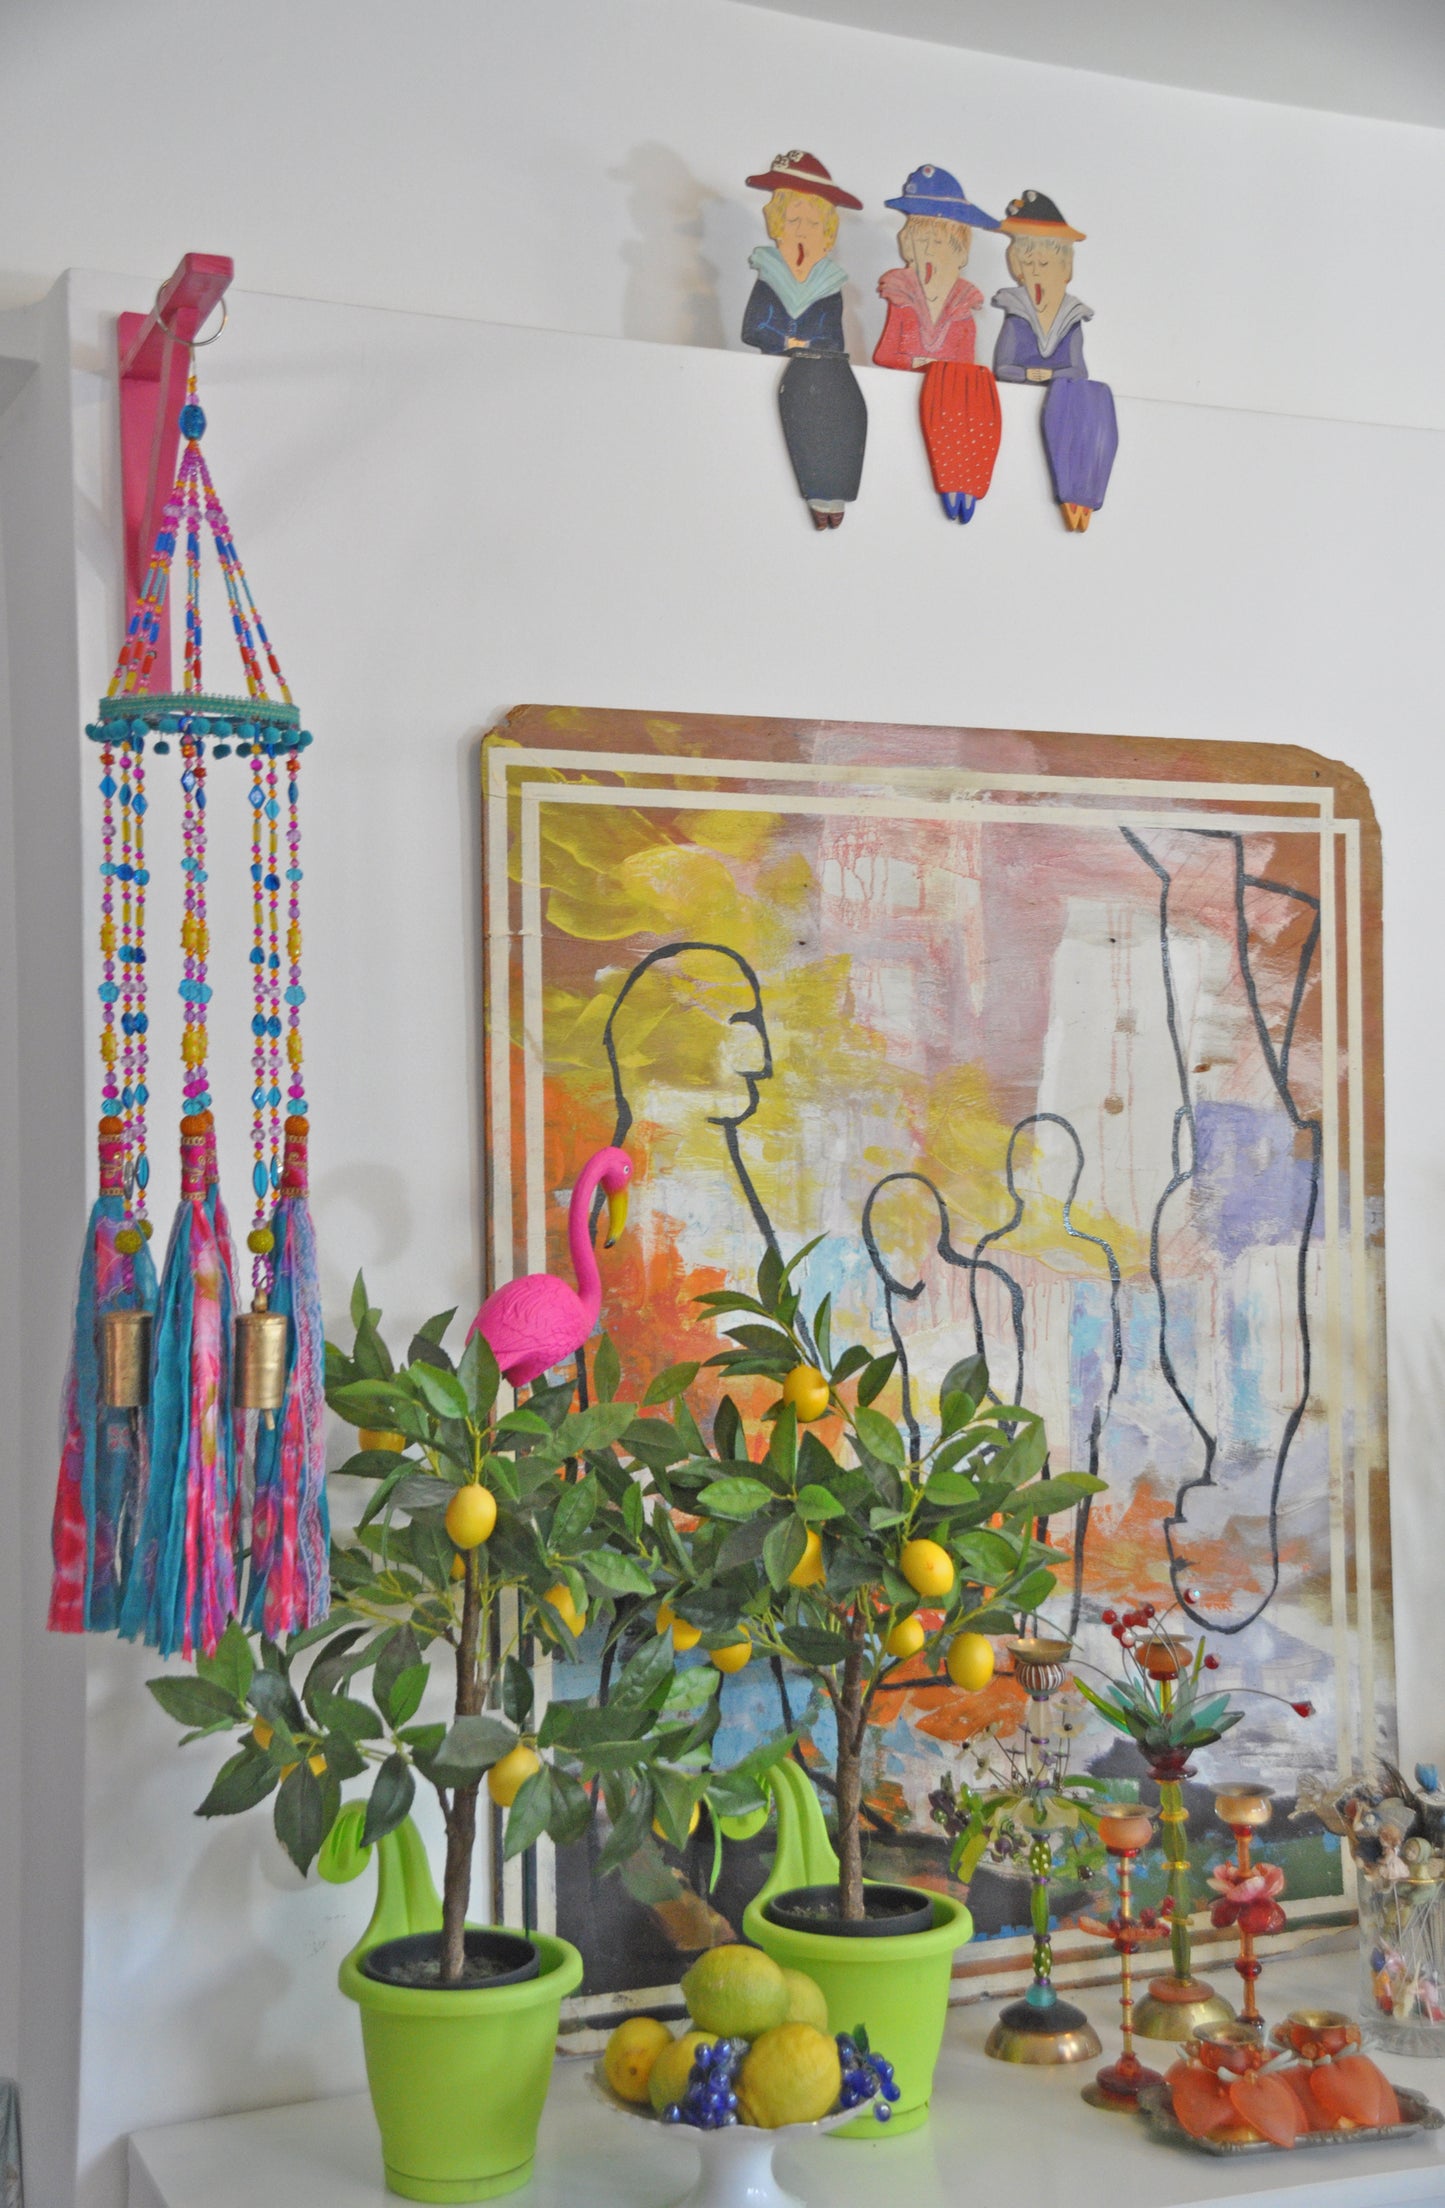 Colorful Beaded Mobile Wind Chime With Brass Bells and Fabric Tassels